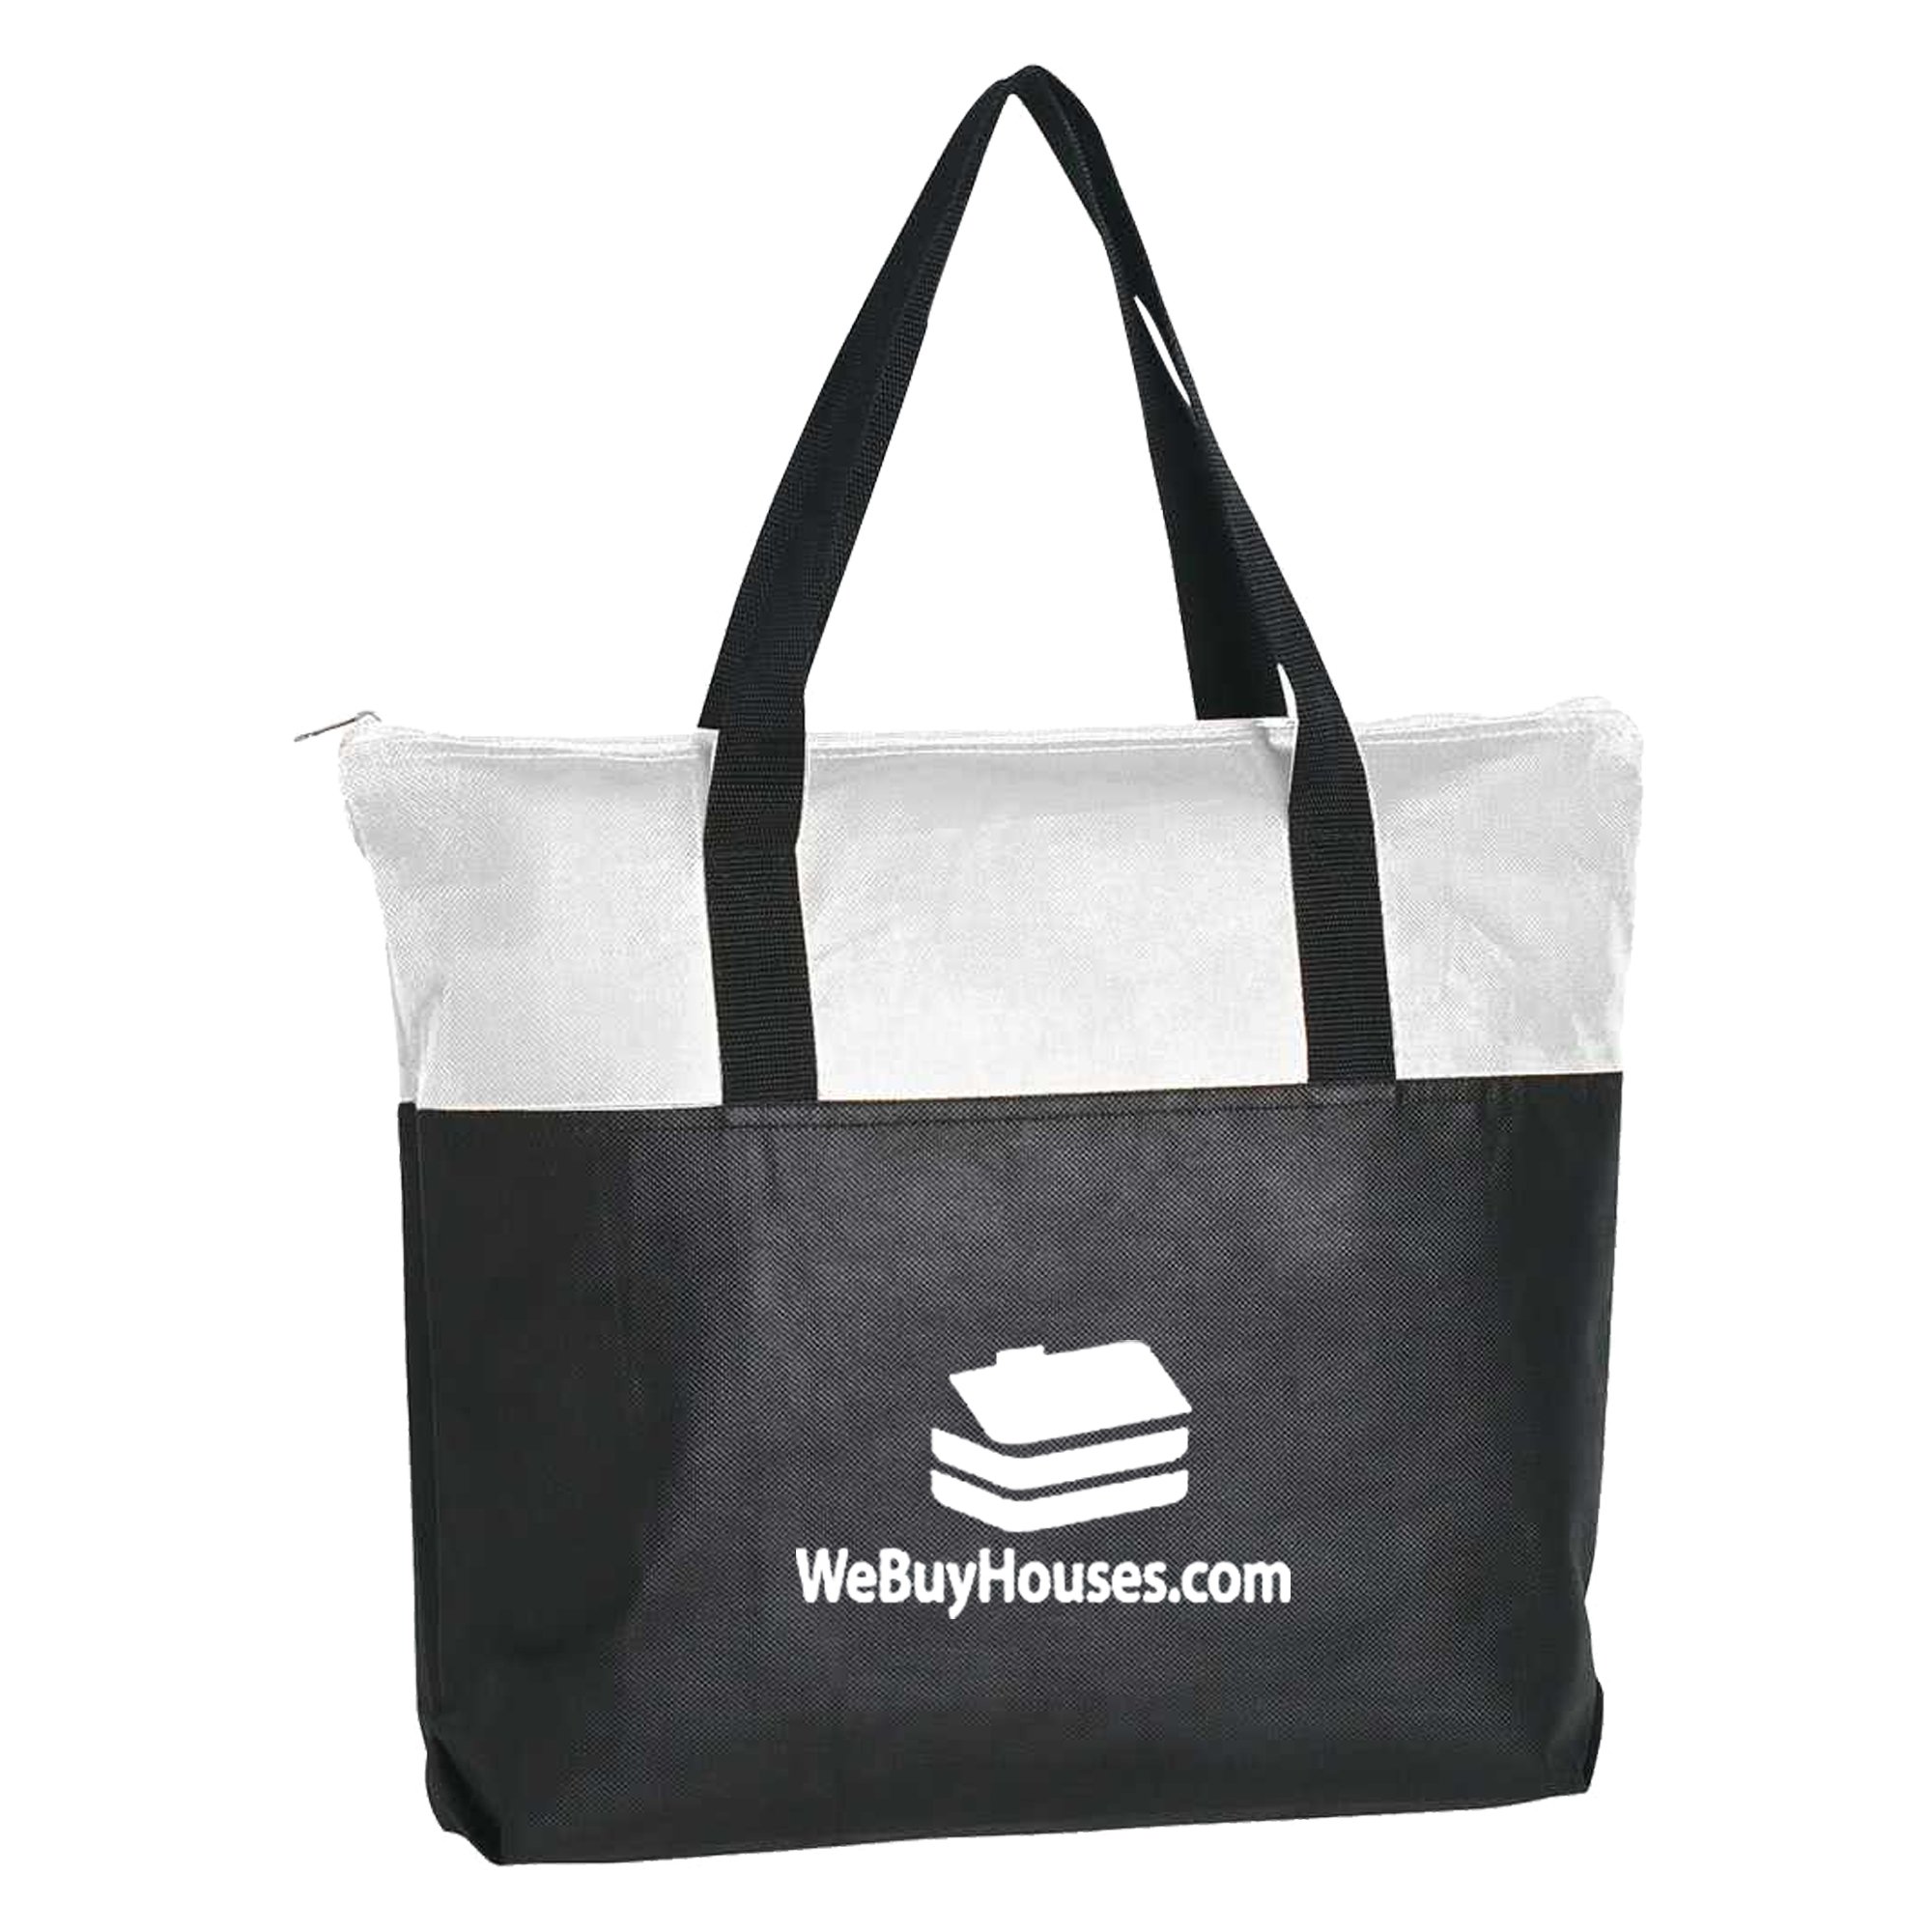 Custom Large Black Tote Bag with Zippered Top | National Pen